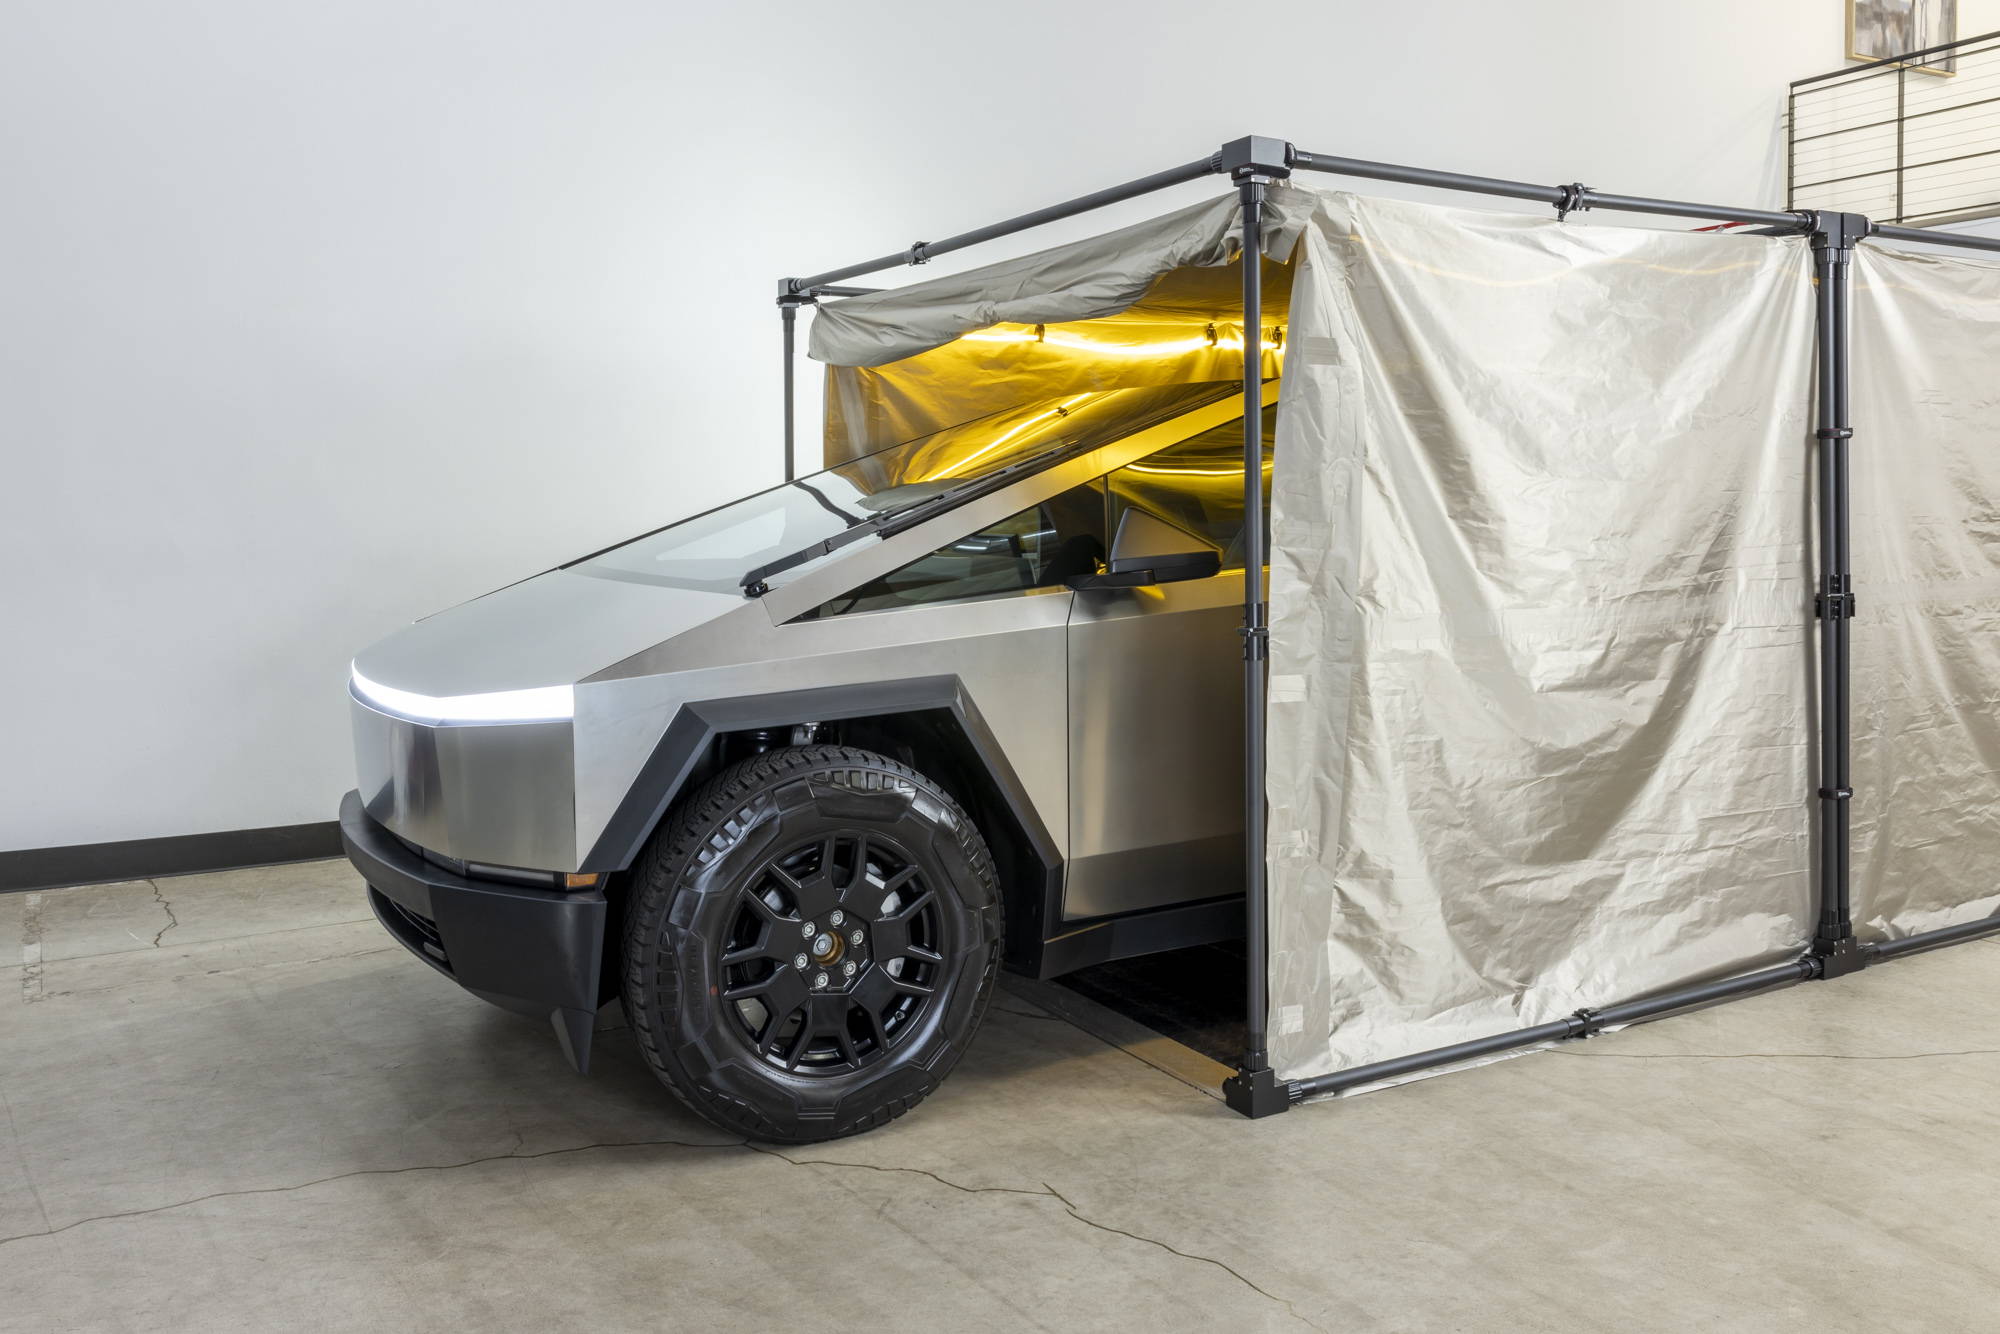 Mission Darkness CYBERCYLENT Faraday Car Cover with Tesla Cybertruck stored inside